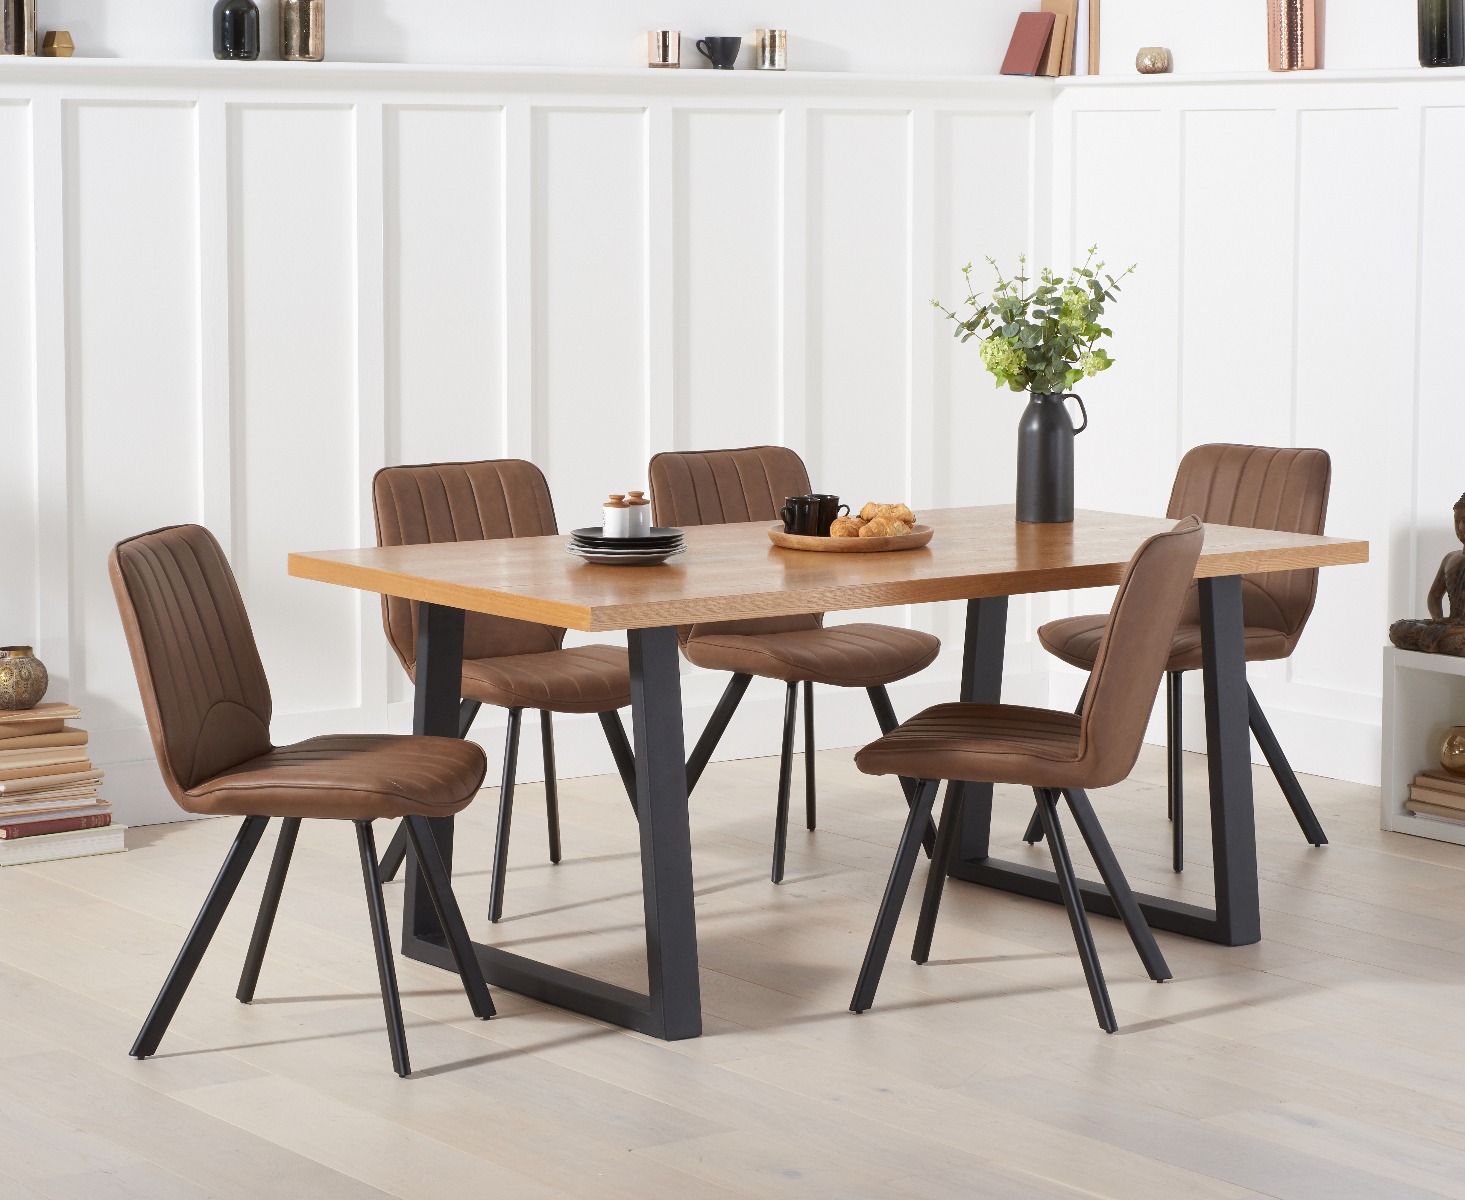 Urban 180cm Ash And Veneer Industrial Dining Table With 4 Grey Hendrick Chairs